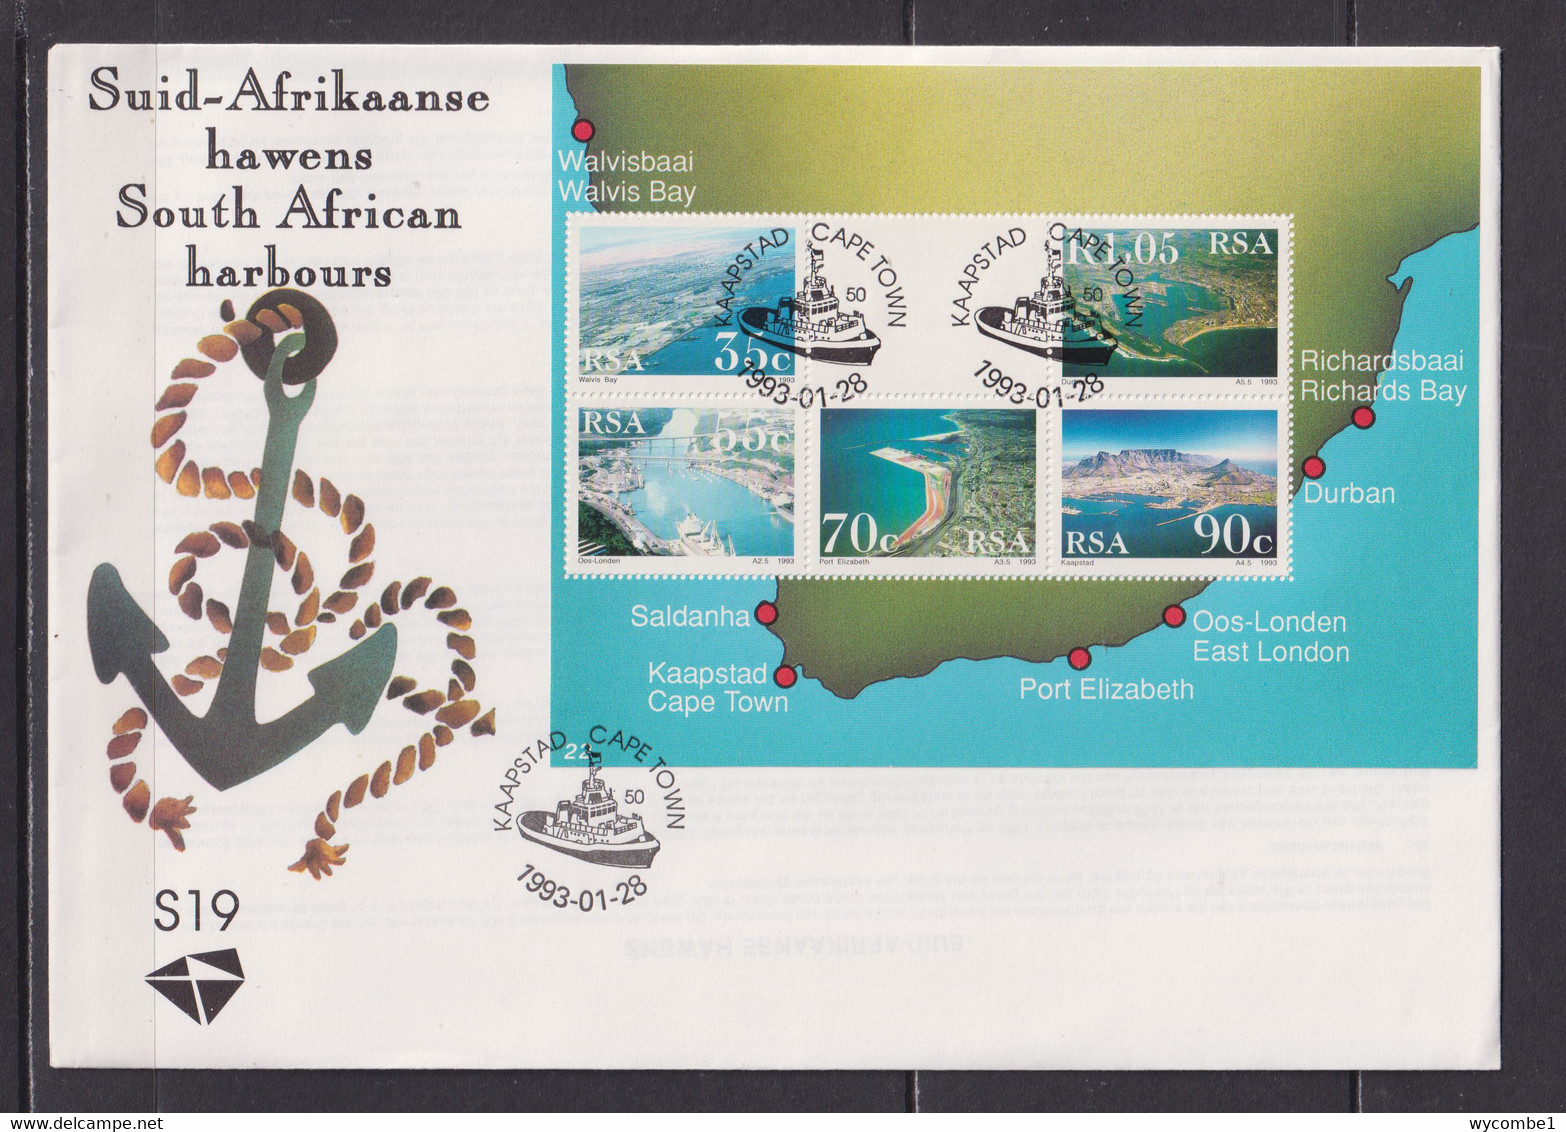 SOUTH AFRICA - 1993 Harbours Miniature Sheet Large FDC - Covers & Documents